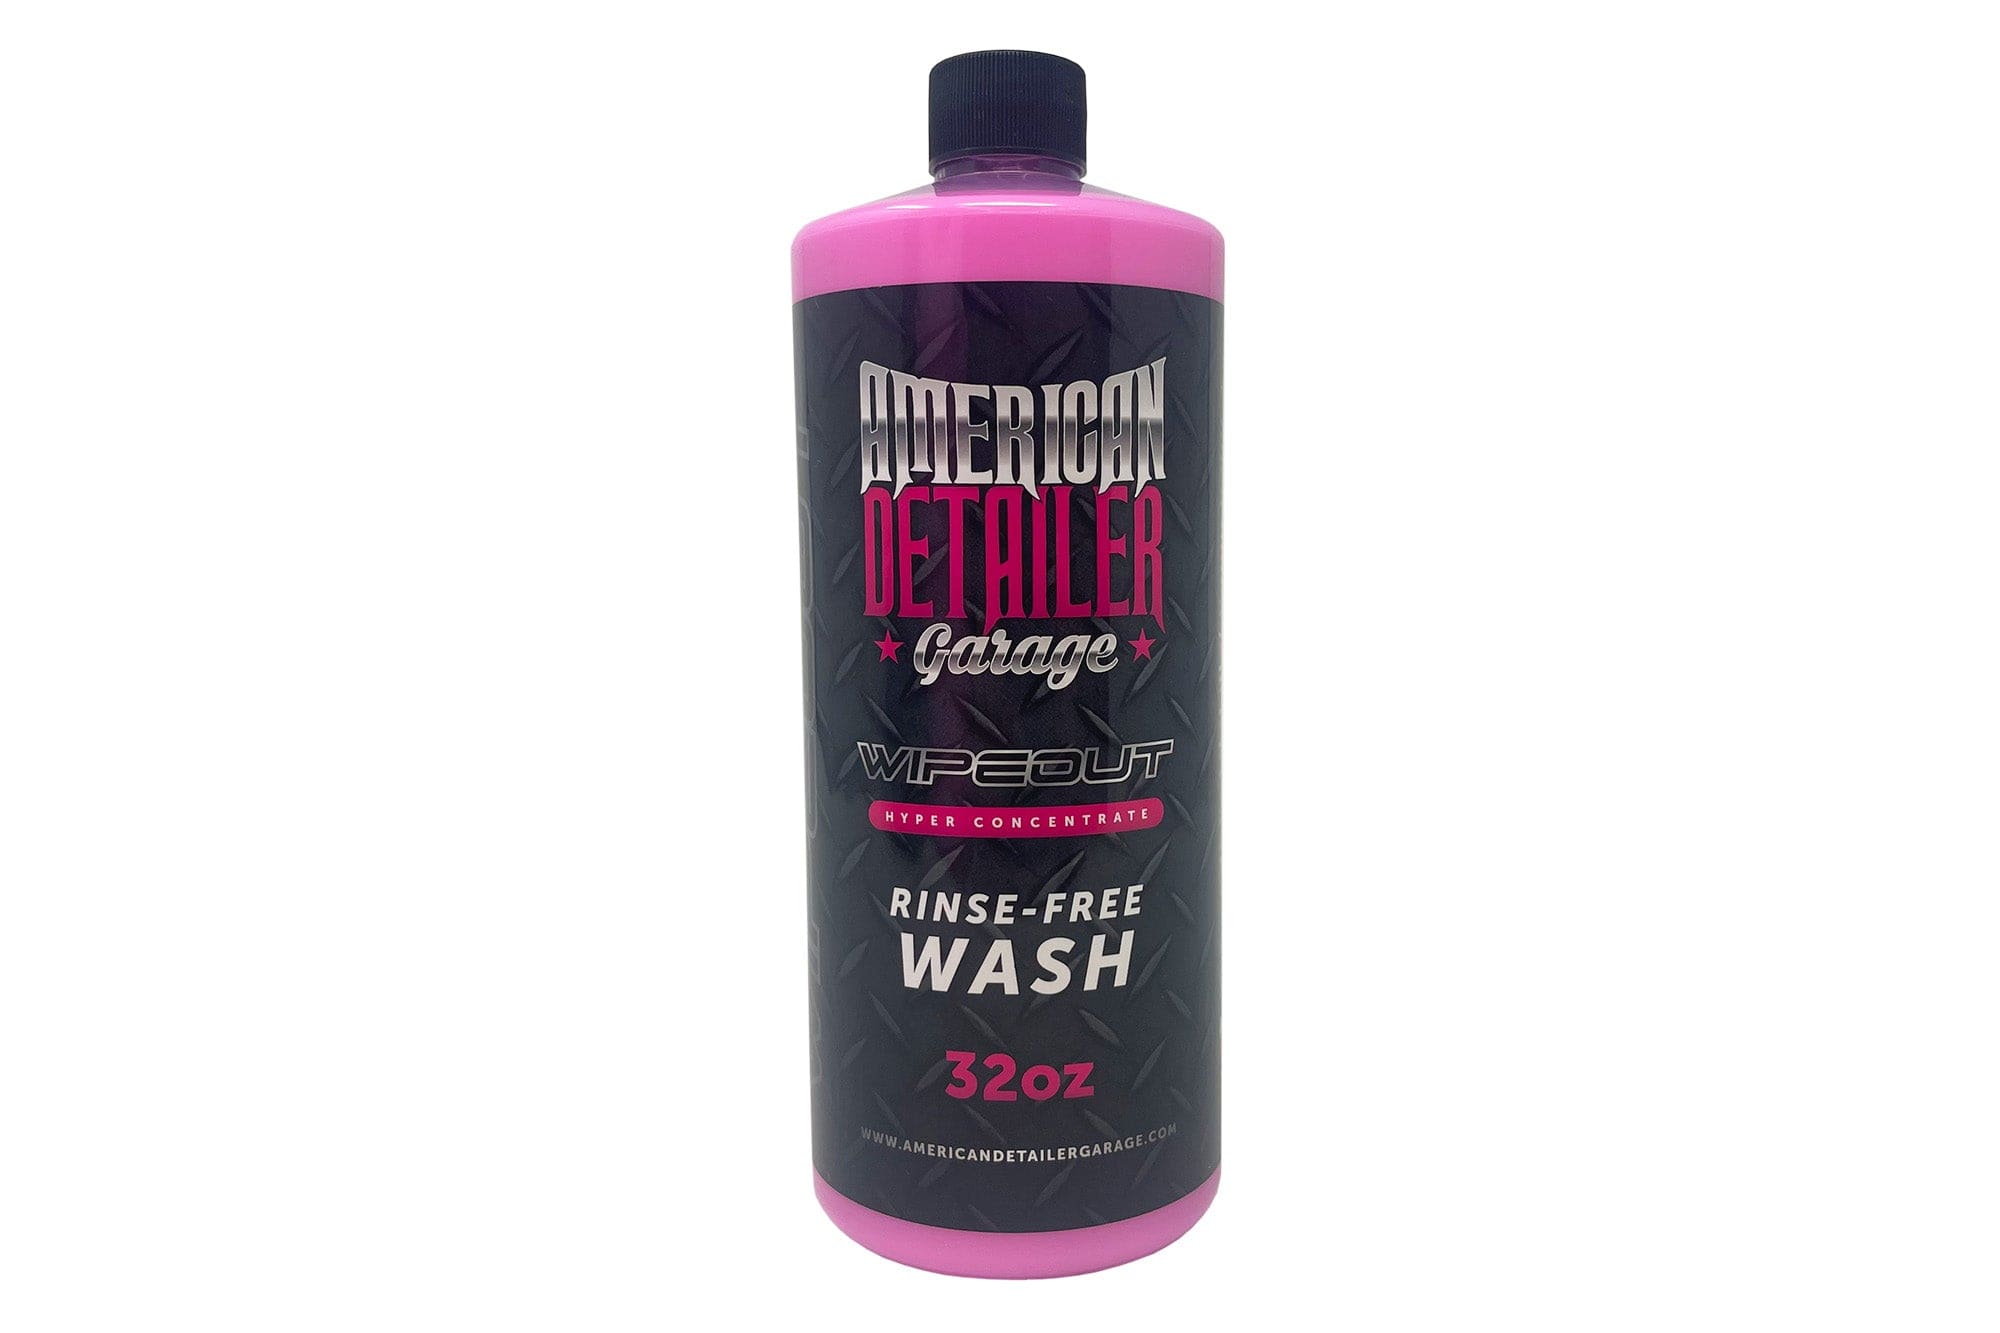 American Detailer Garage Chemical Pink [WIPEOUT] Hybrid Waterless Wash Concentrate - Quart